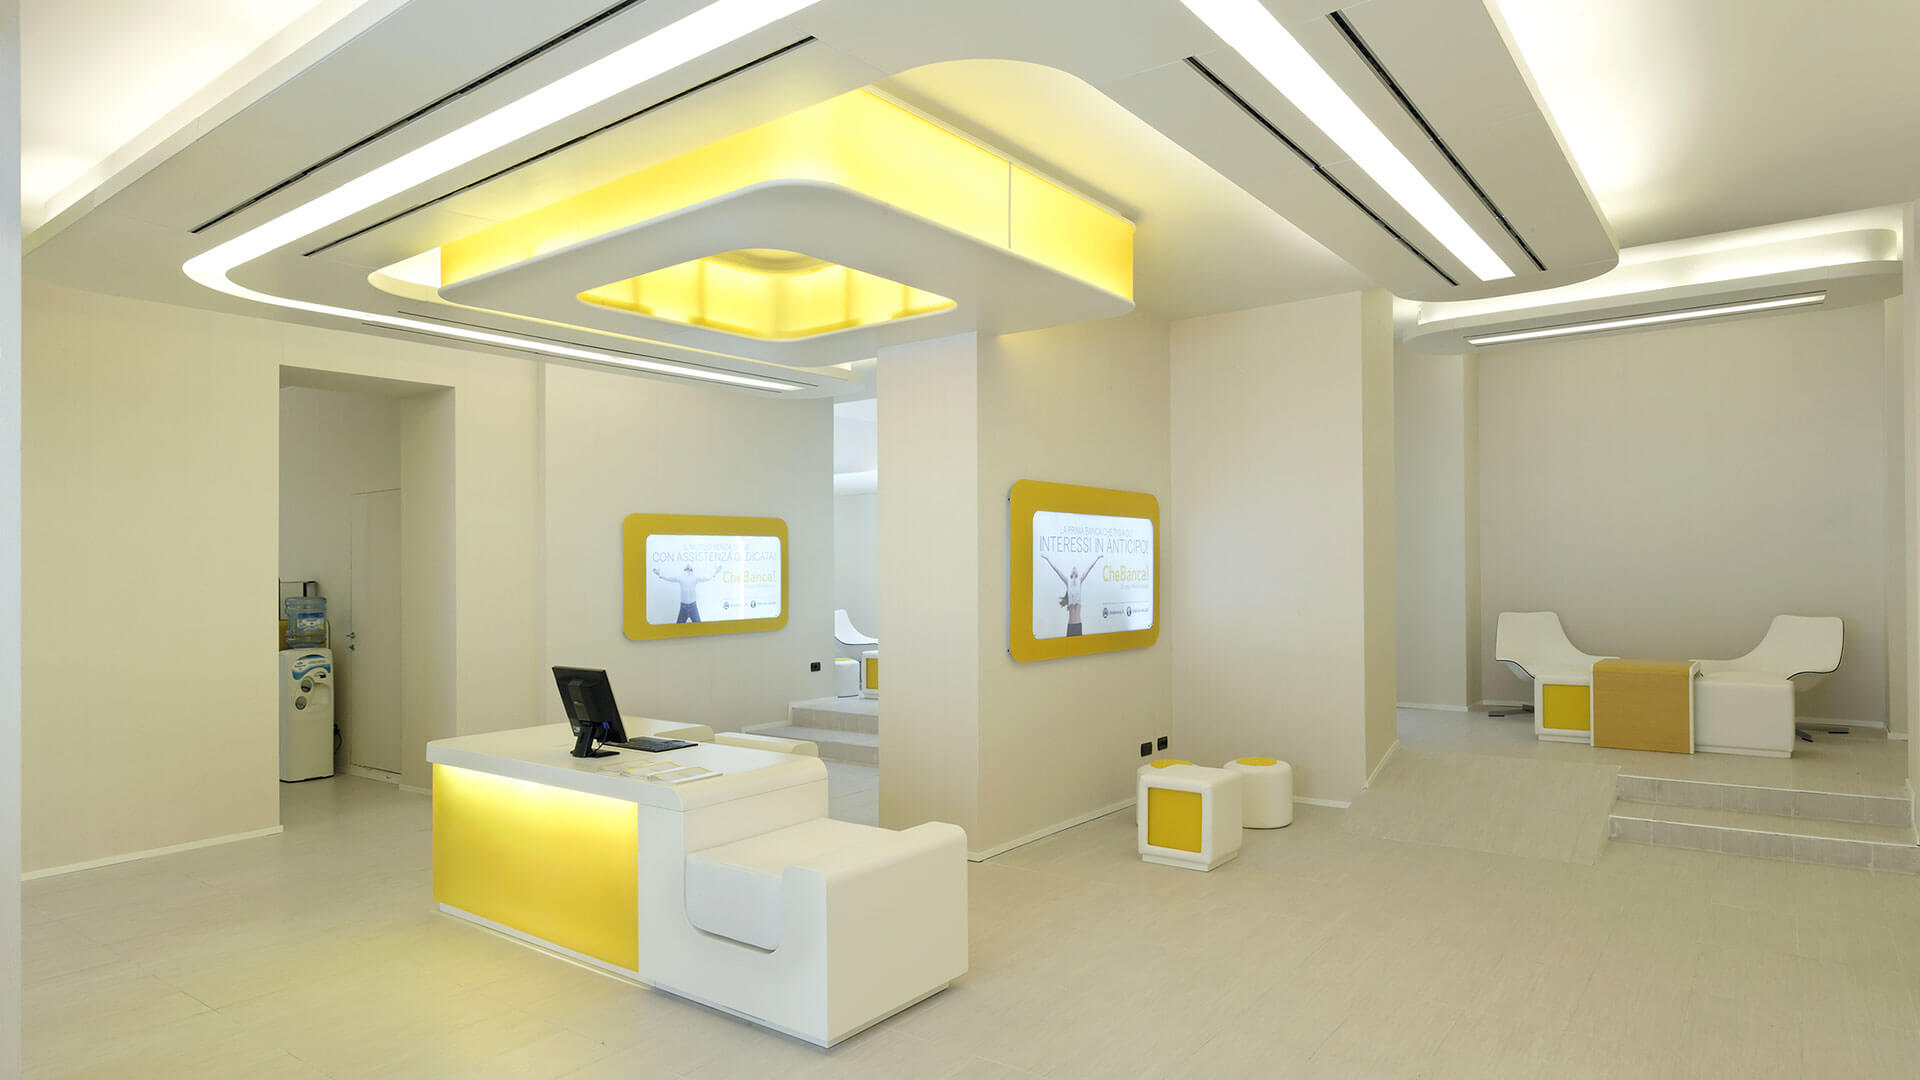 A white room with yellow accents and white furniture
